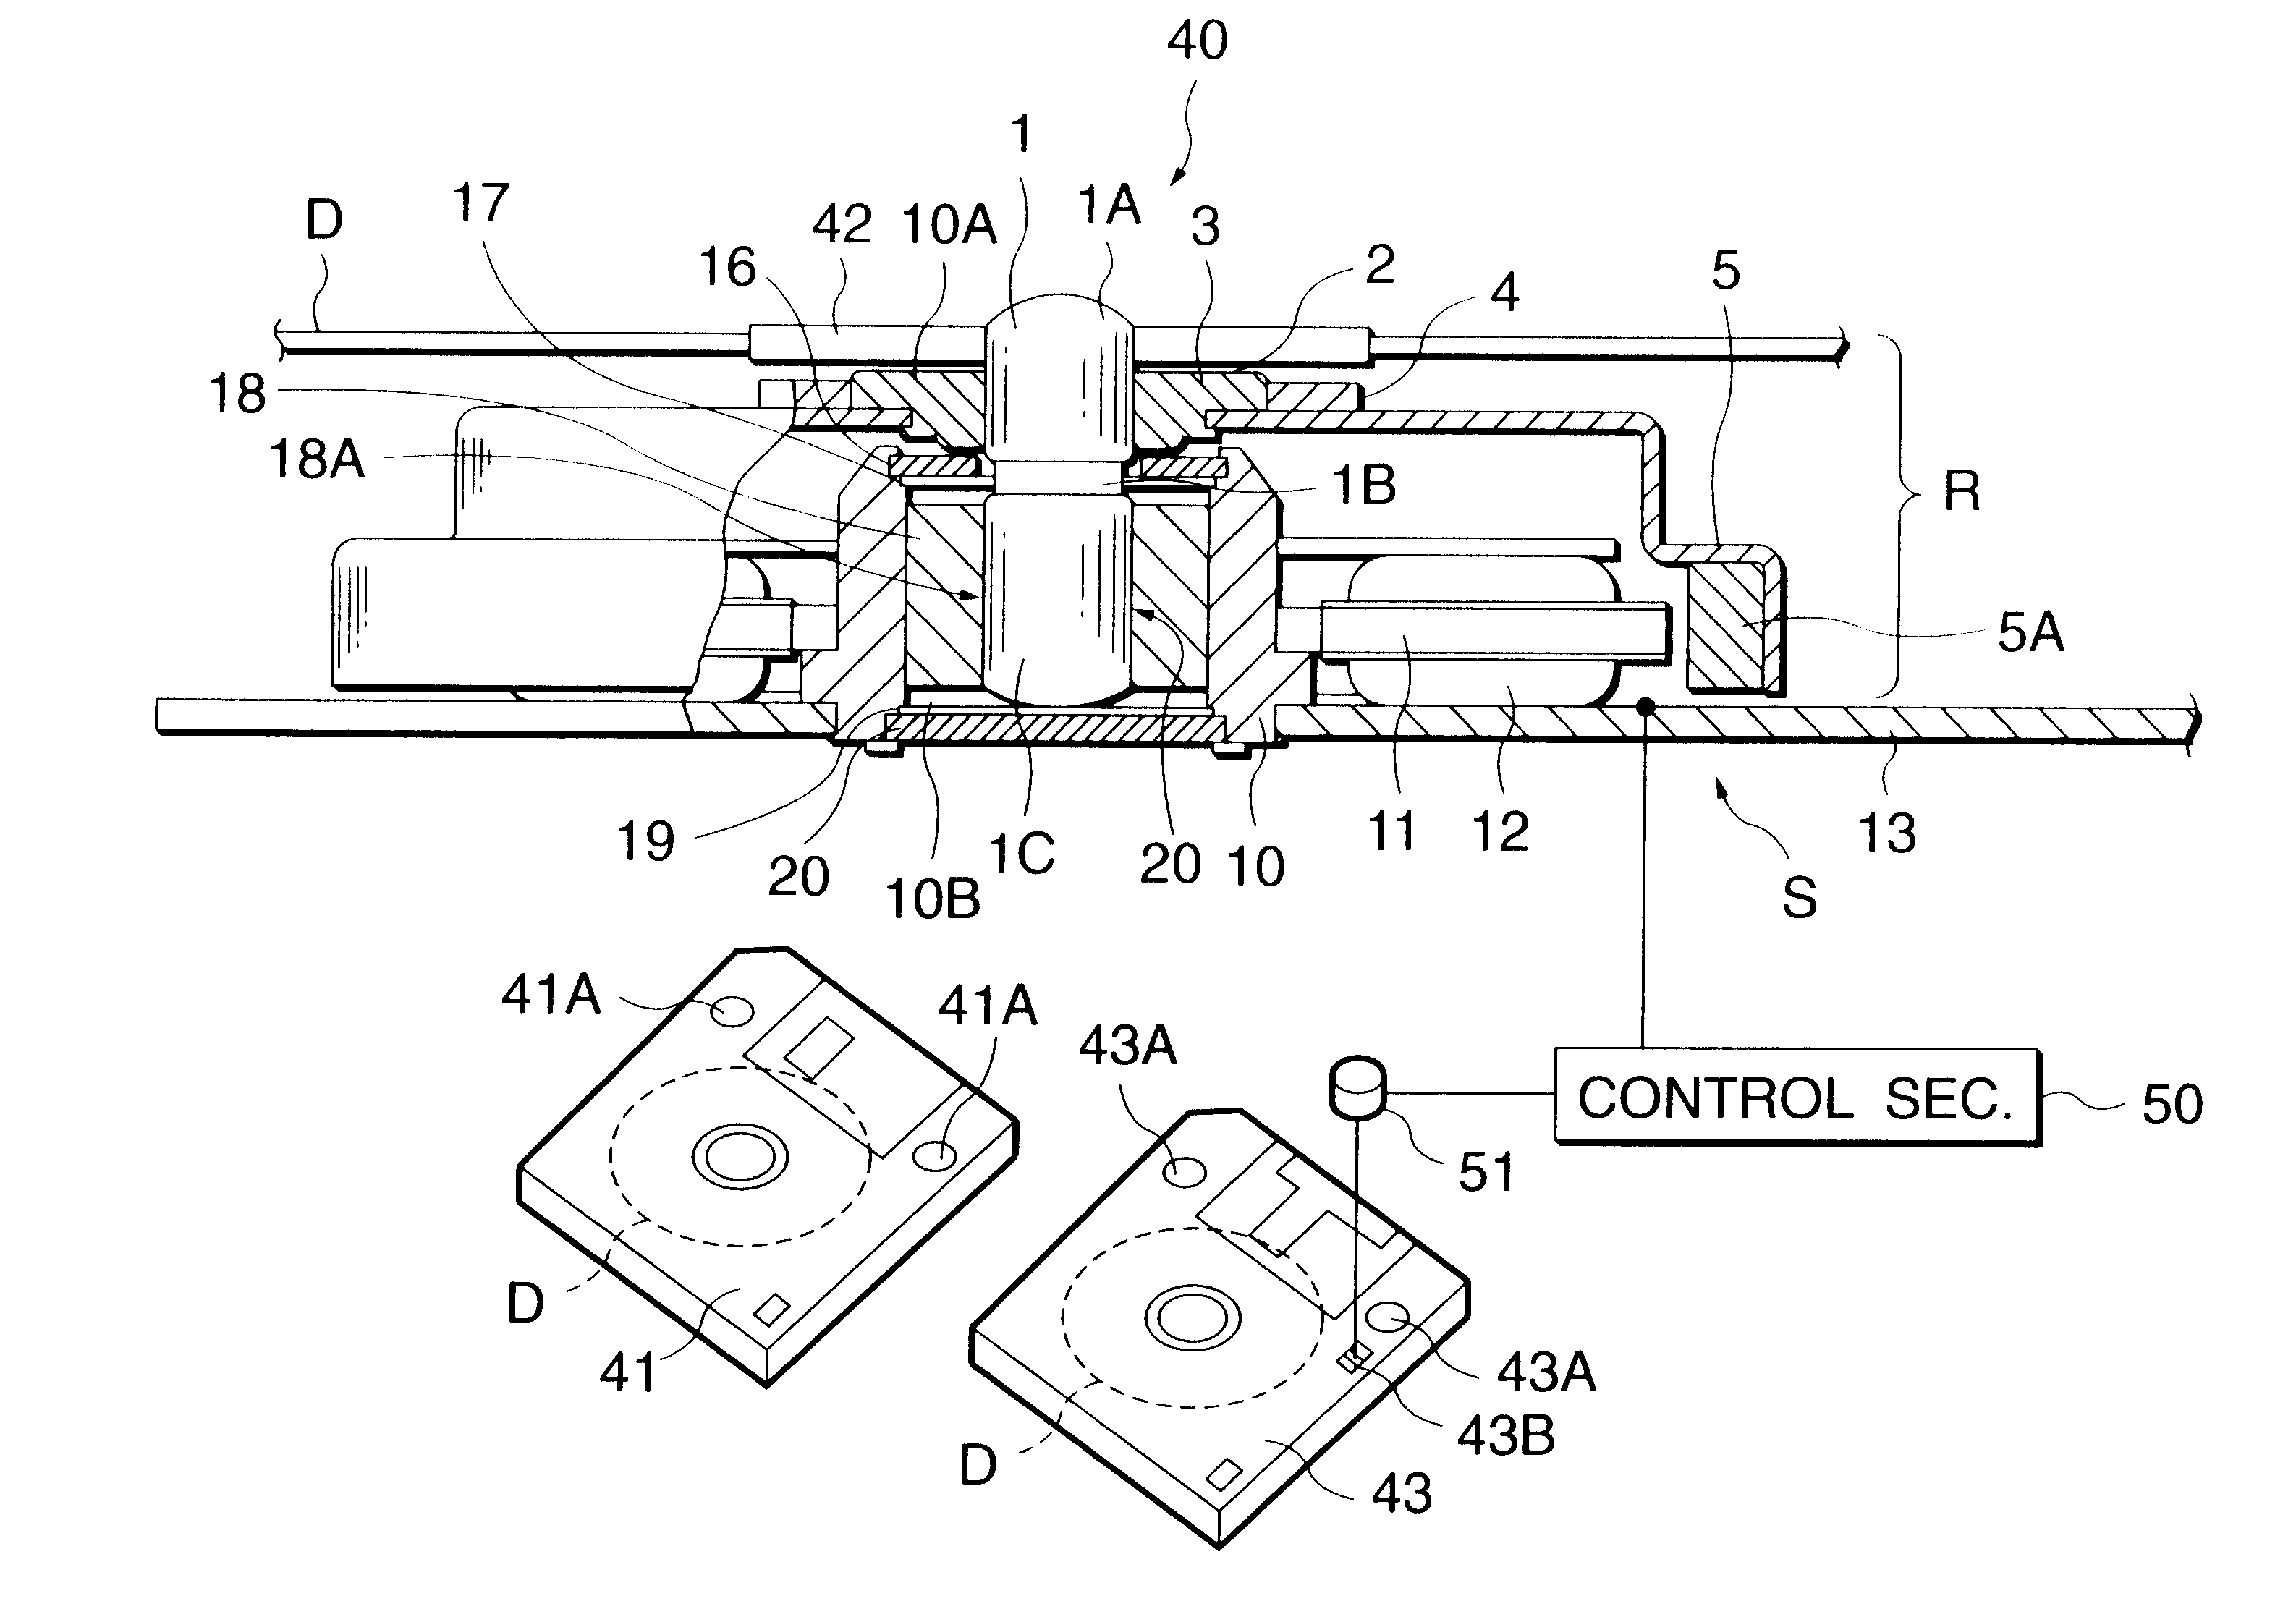 Motor for rotating a disk-shaped information recording medium in a disk drive apparatus